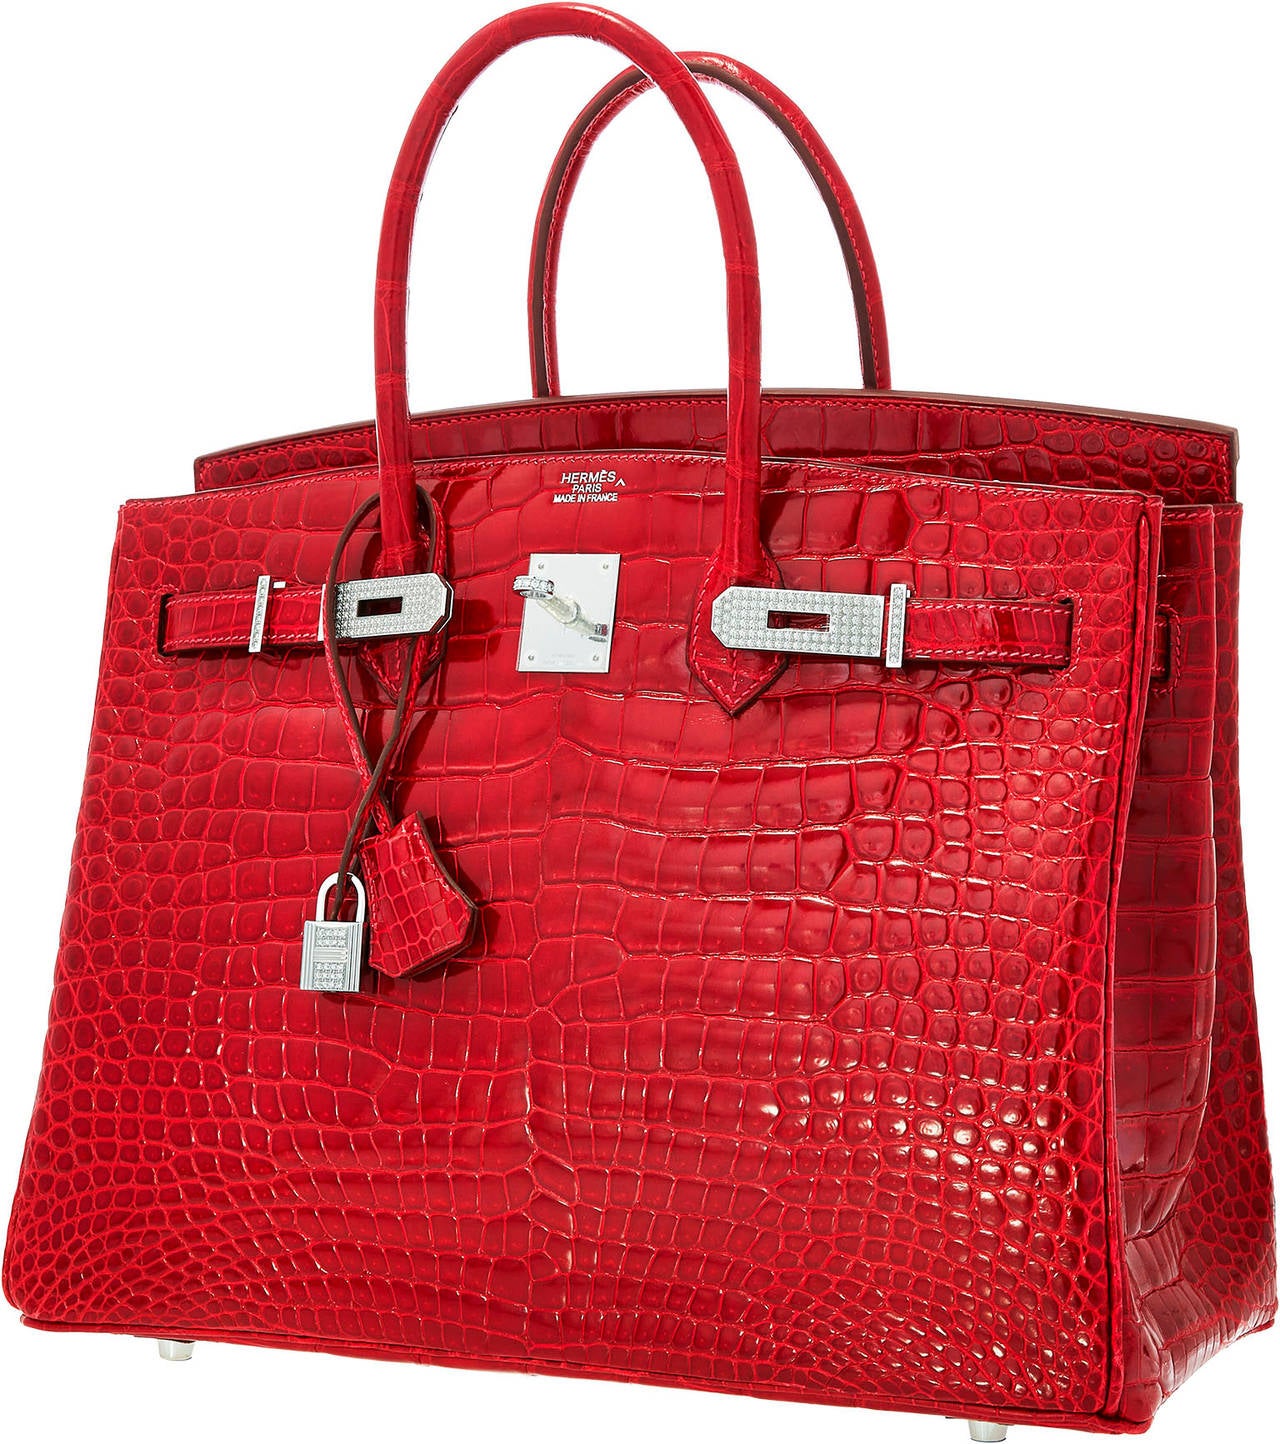 A 35cm Diamond Crocodile Birkin is possibly most desirable handbag in the world. This bag is done in Braise Porosus Crocodile, one of Hermes' most luxurious exotics. The coloration is paired perfectly with 18K White Gold Hardware, which is studded